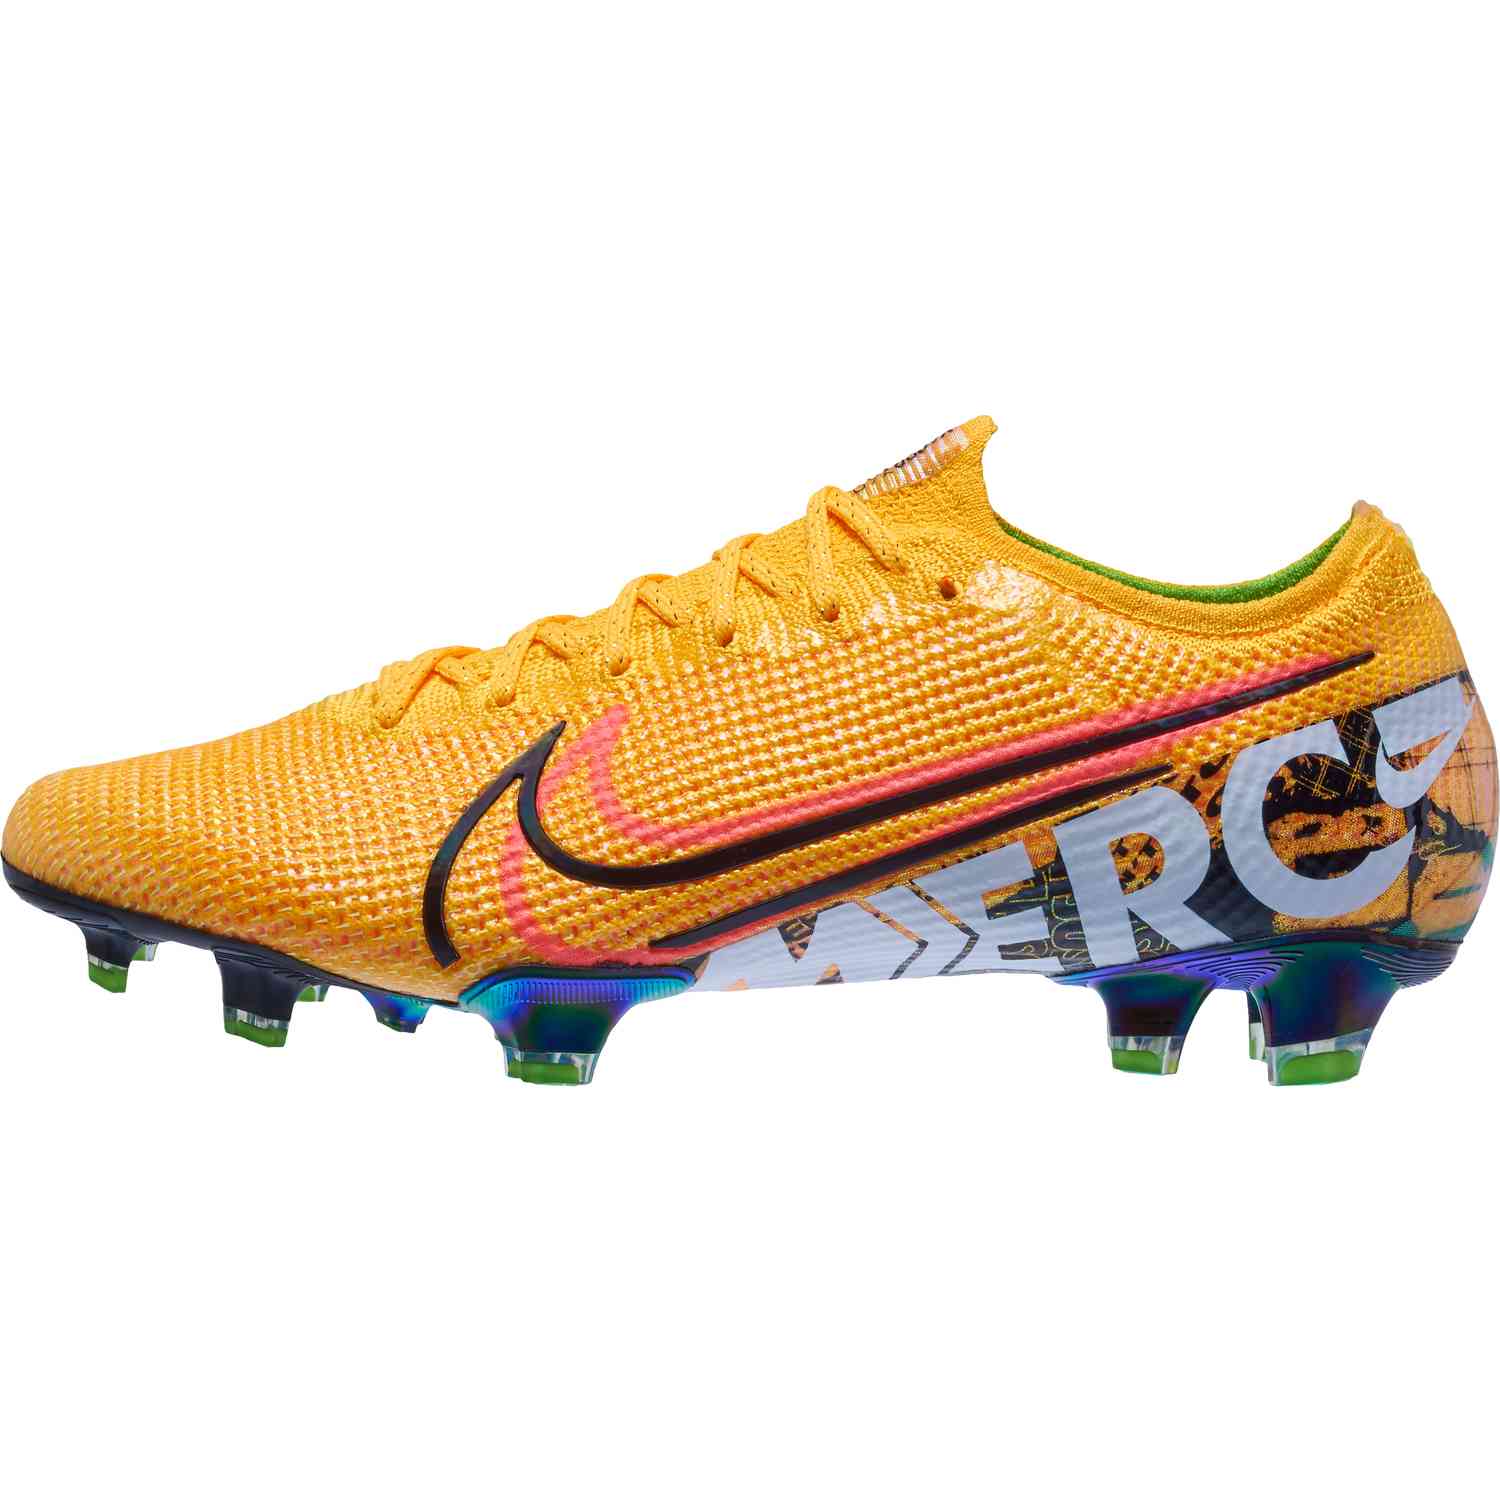 2019 Nike Mercurial Superfly 7 and Vapor 13 Tech Review